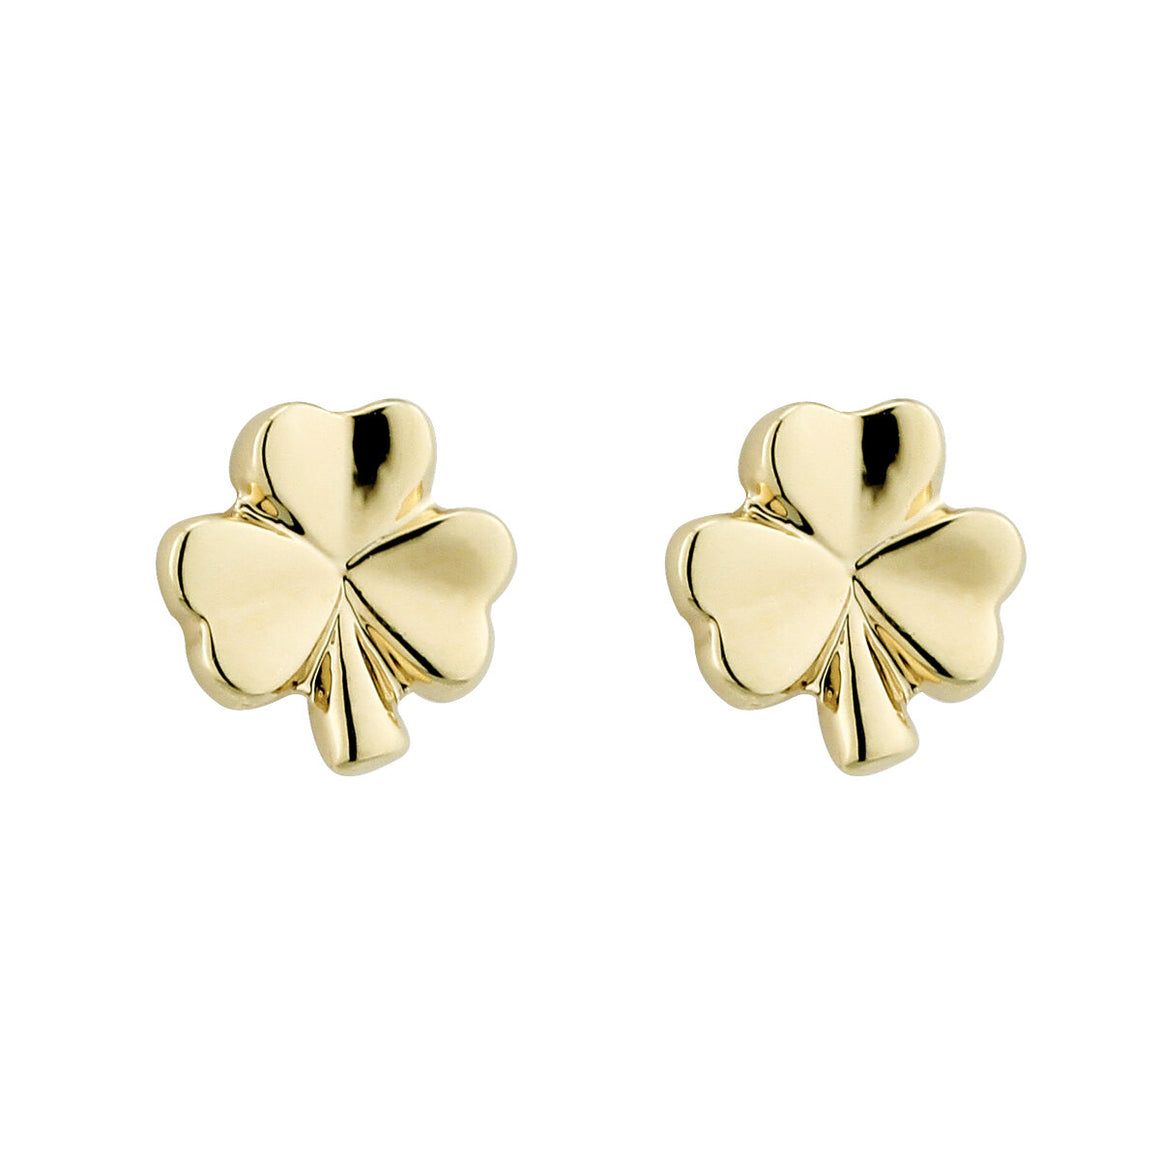 18ct Gold Plated small shamrock Stud Earrings.